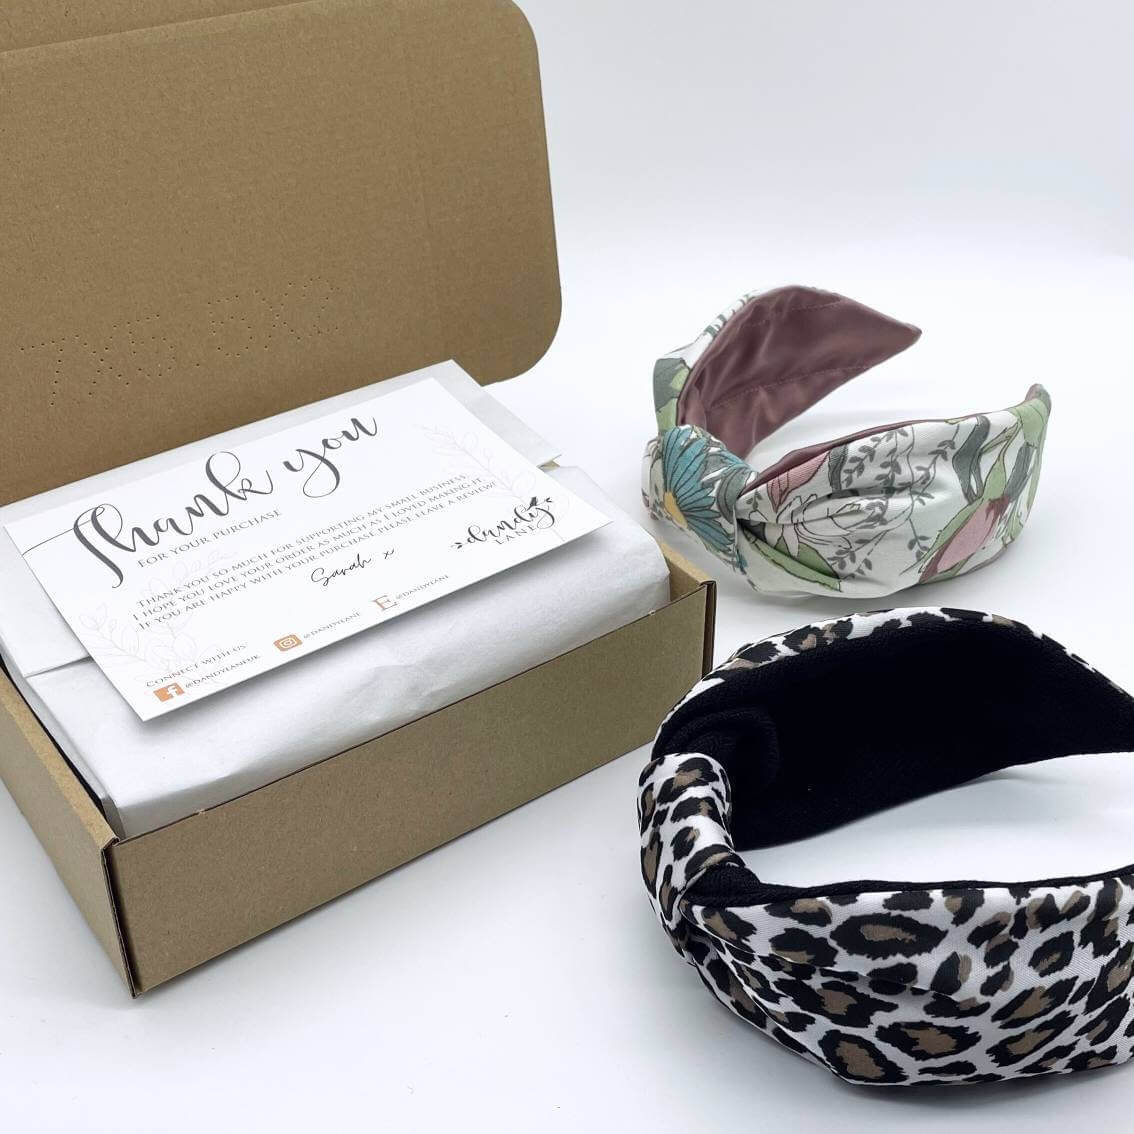 Two headbands, next to a brown gift box, open with folded white tissue paper and a Dandy Lane thank you postcard on top.